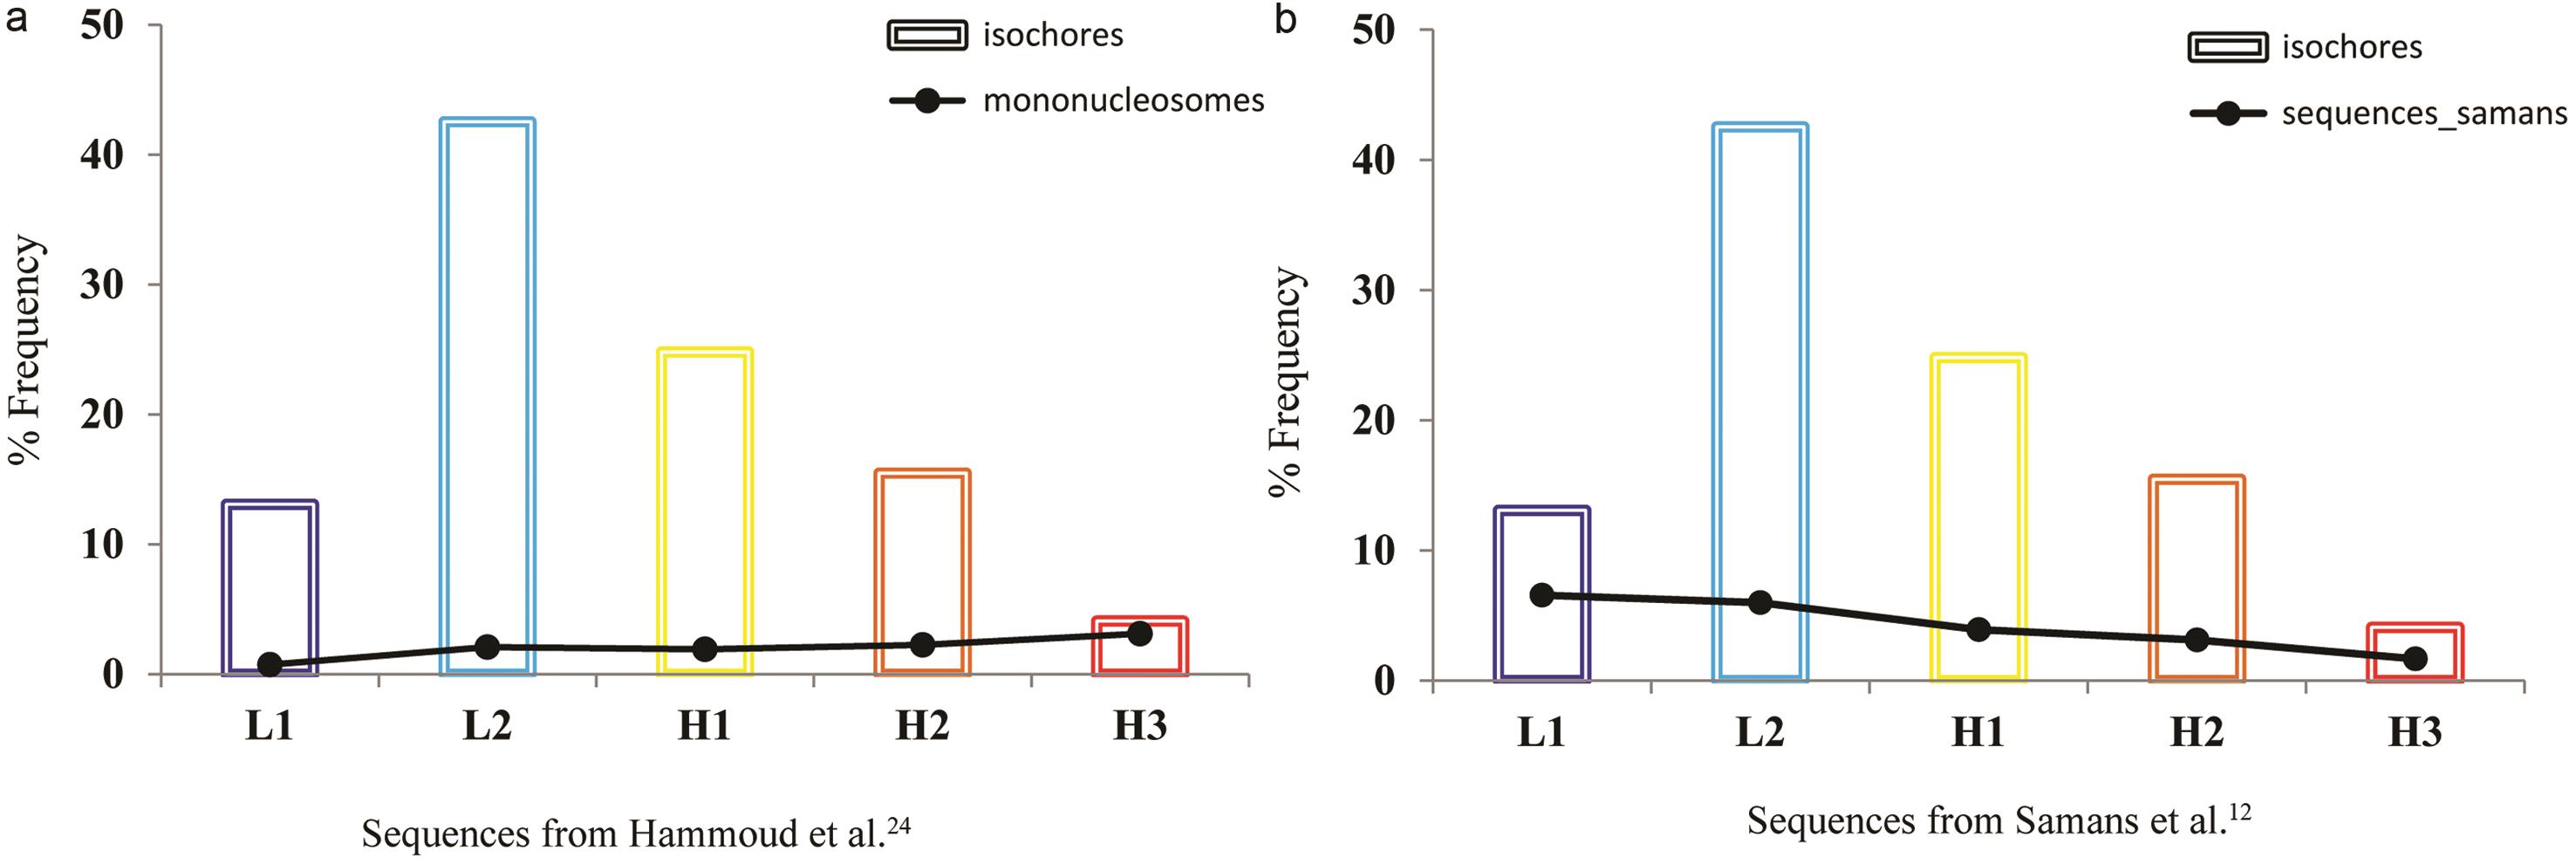 Plots showing density of sequences from literature across isochores.